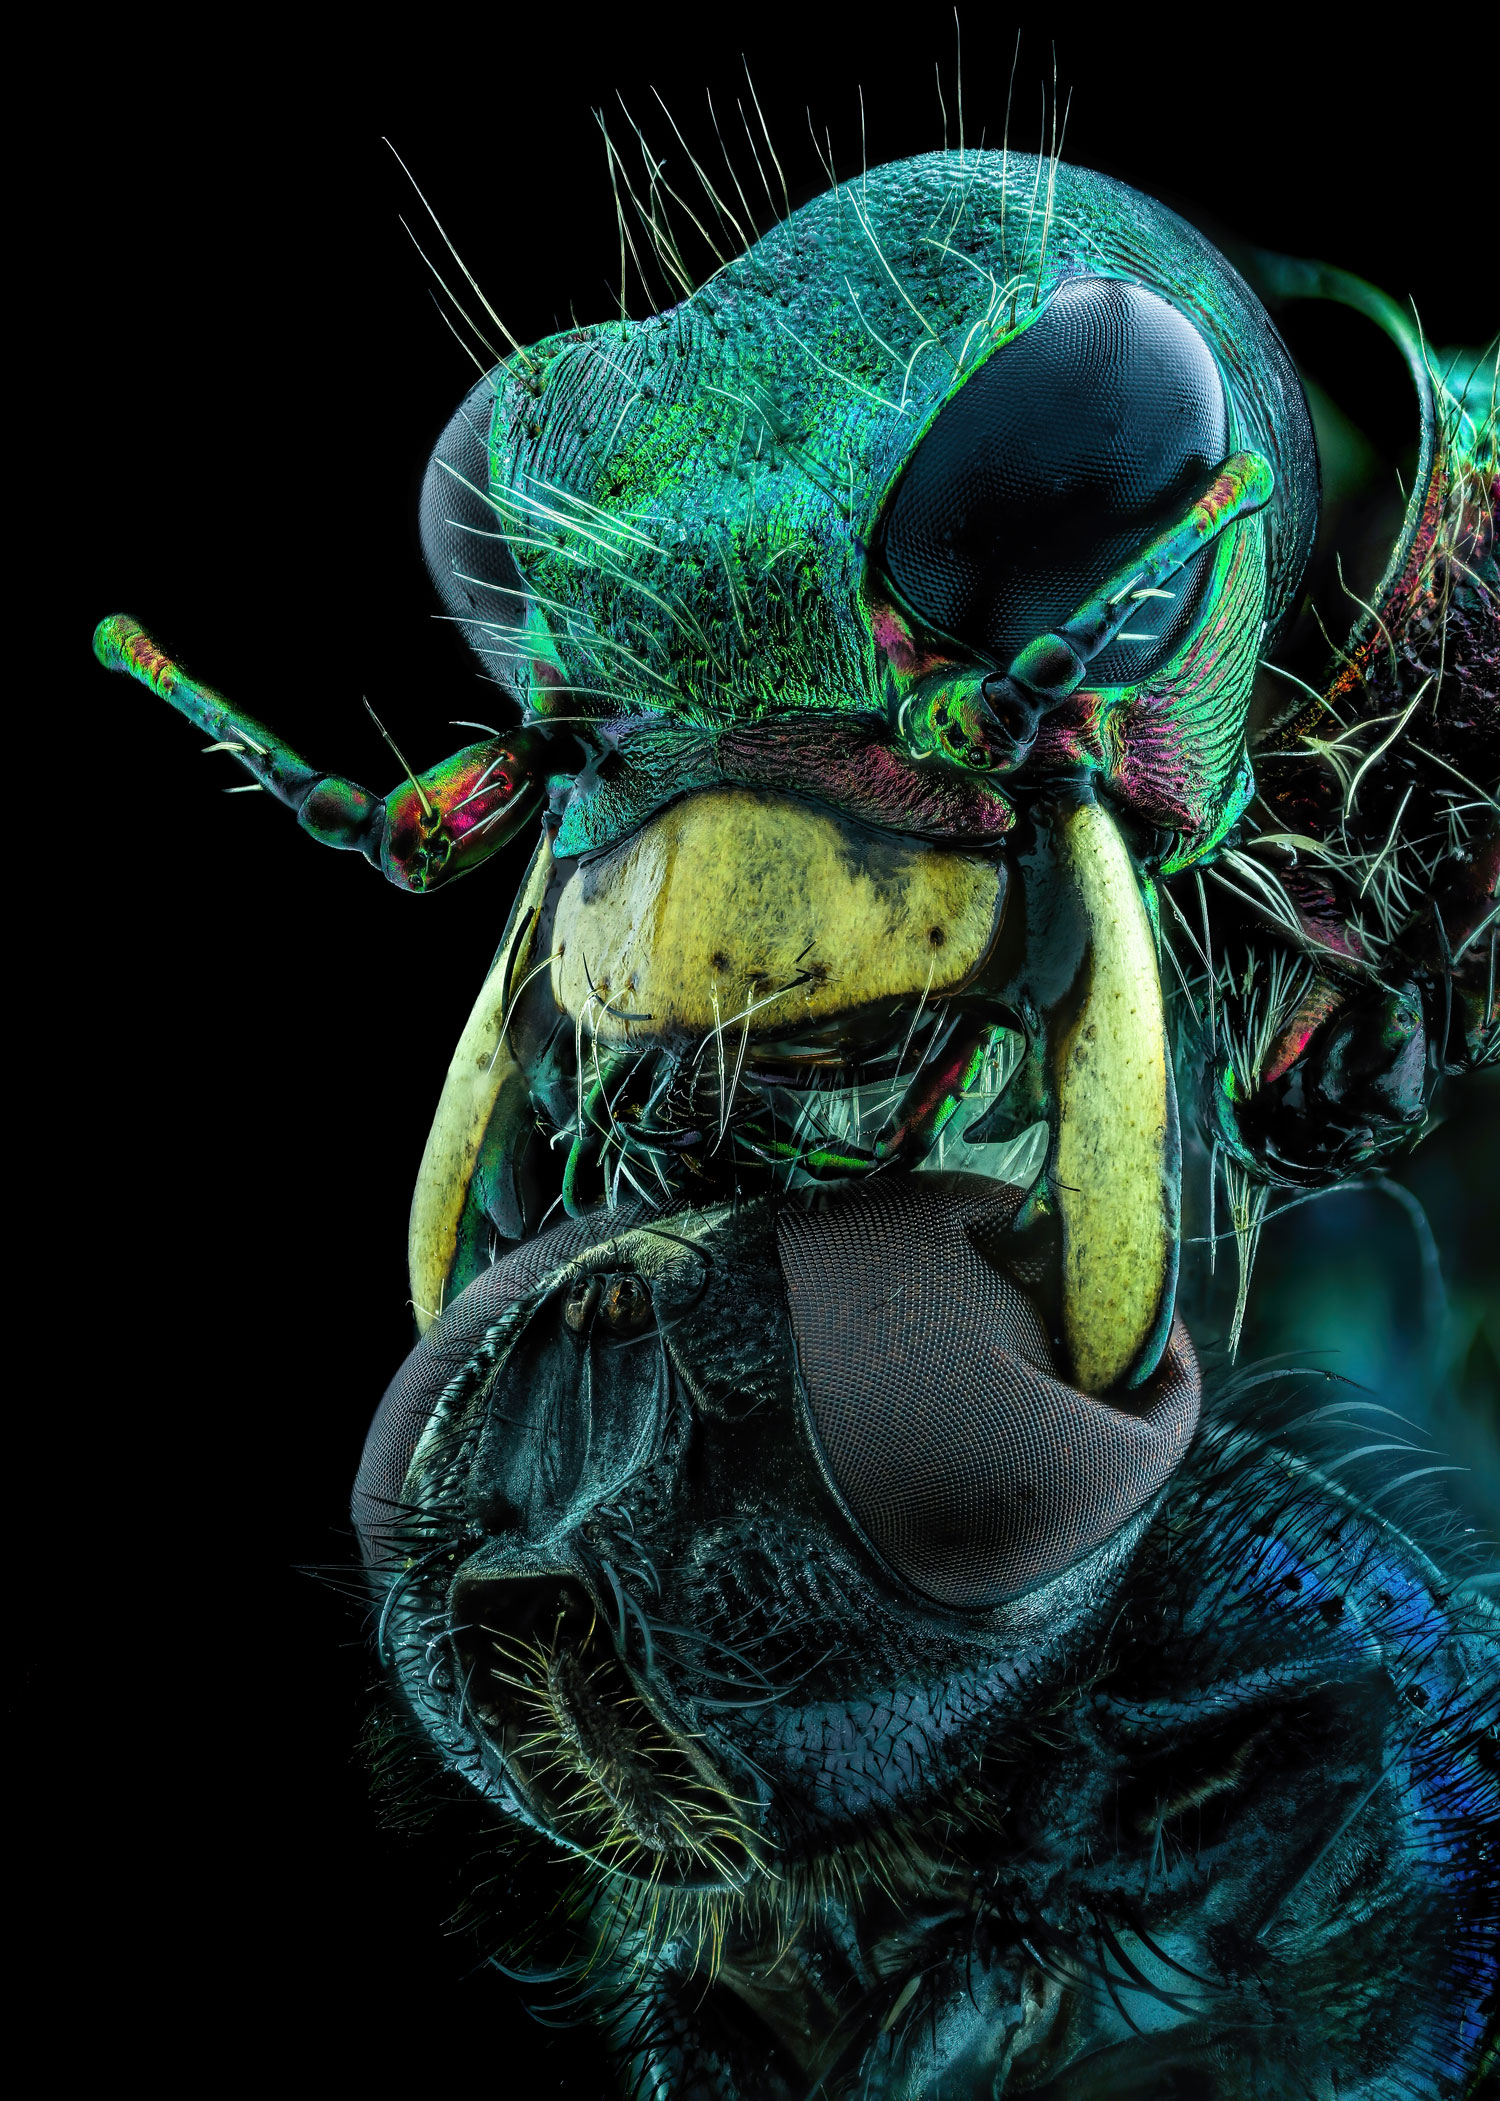 the face of a tiger beetle holding a fly under its chin.  The beetle is shown in bright greens and yellows, with huge dark eyes.